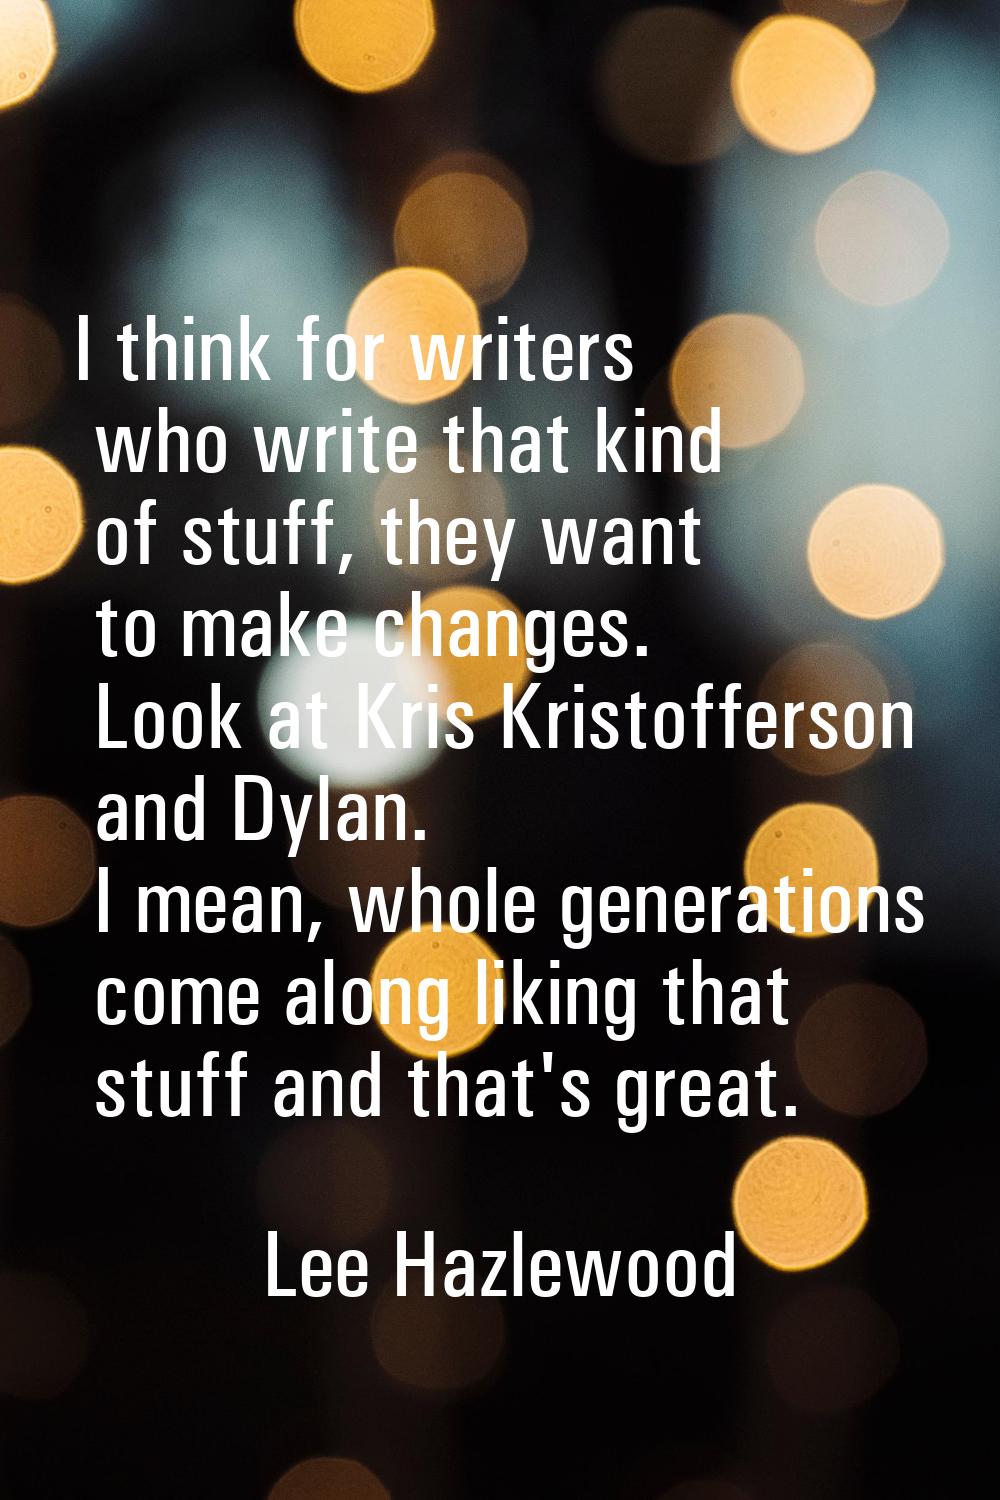 I think for writers who write that kind of stuff, they want to make changes. Look at Kris Kristoffe